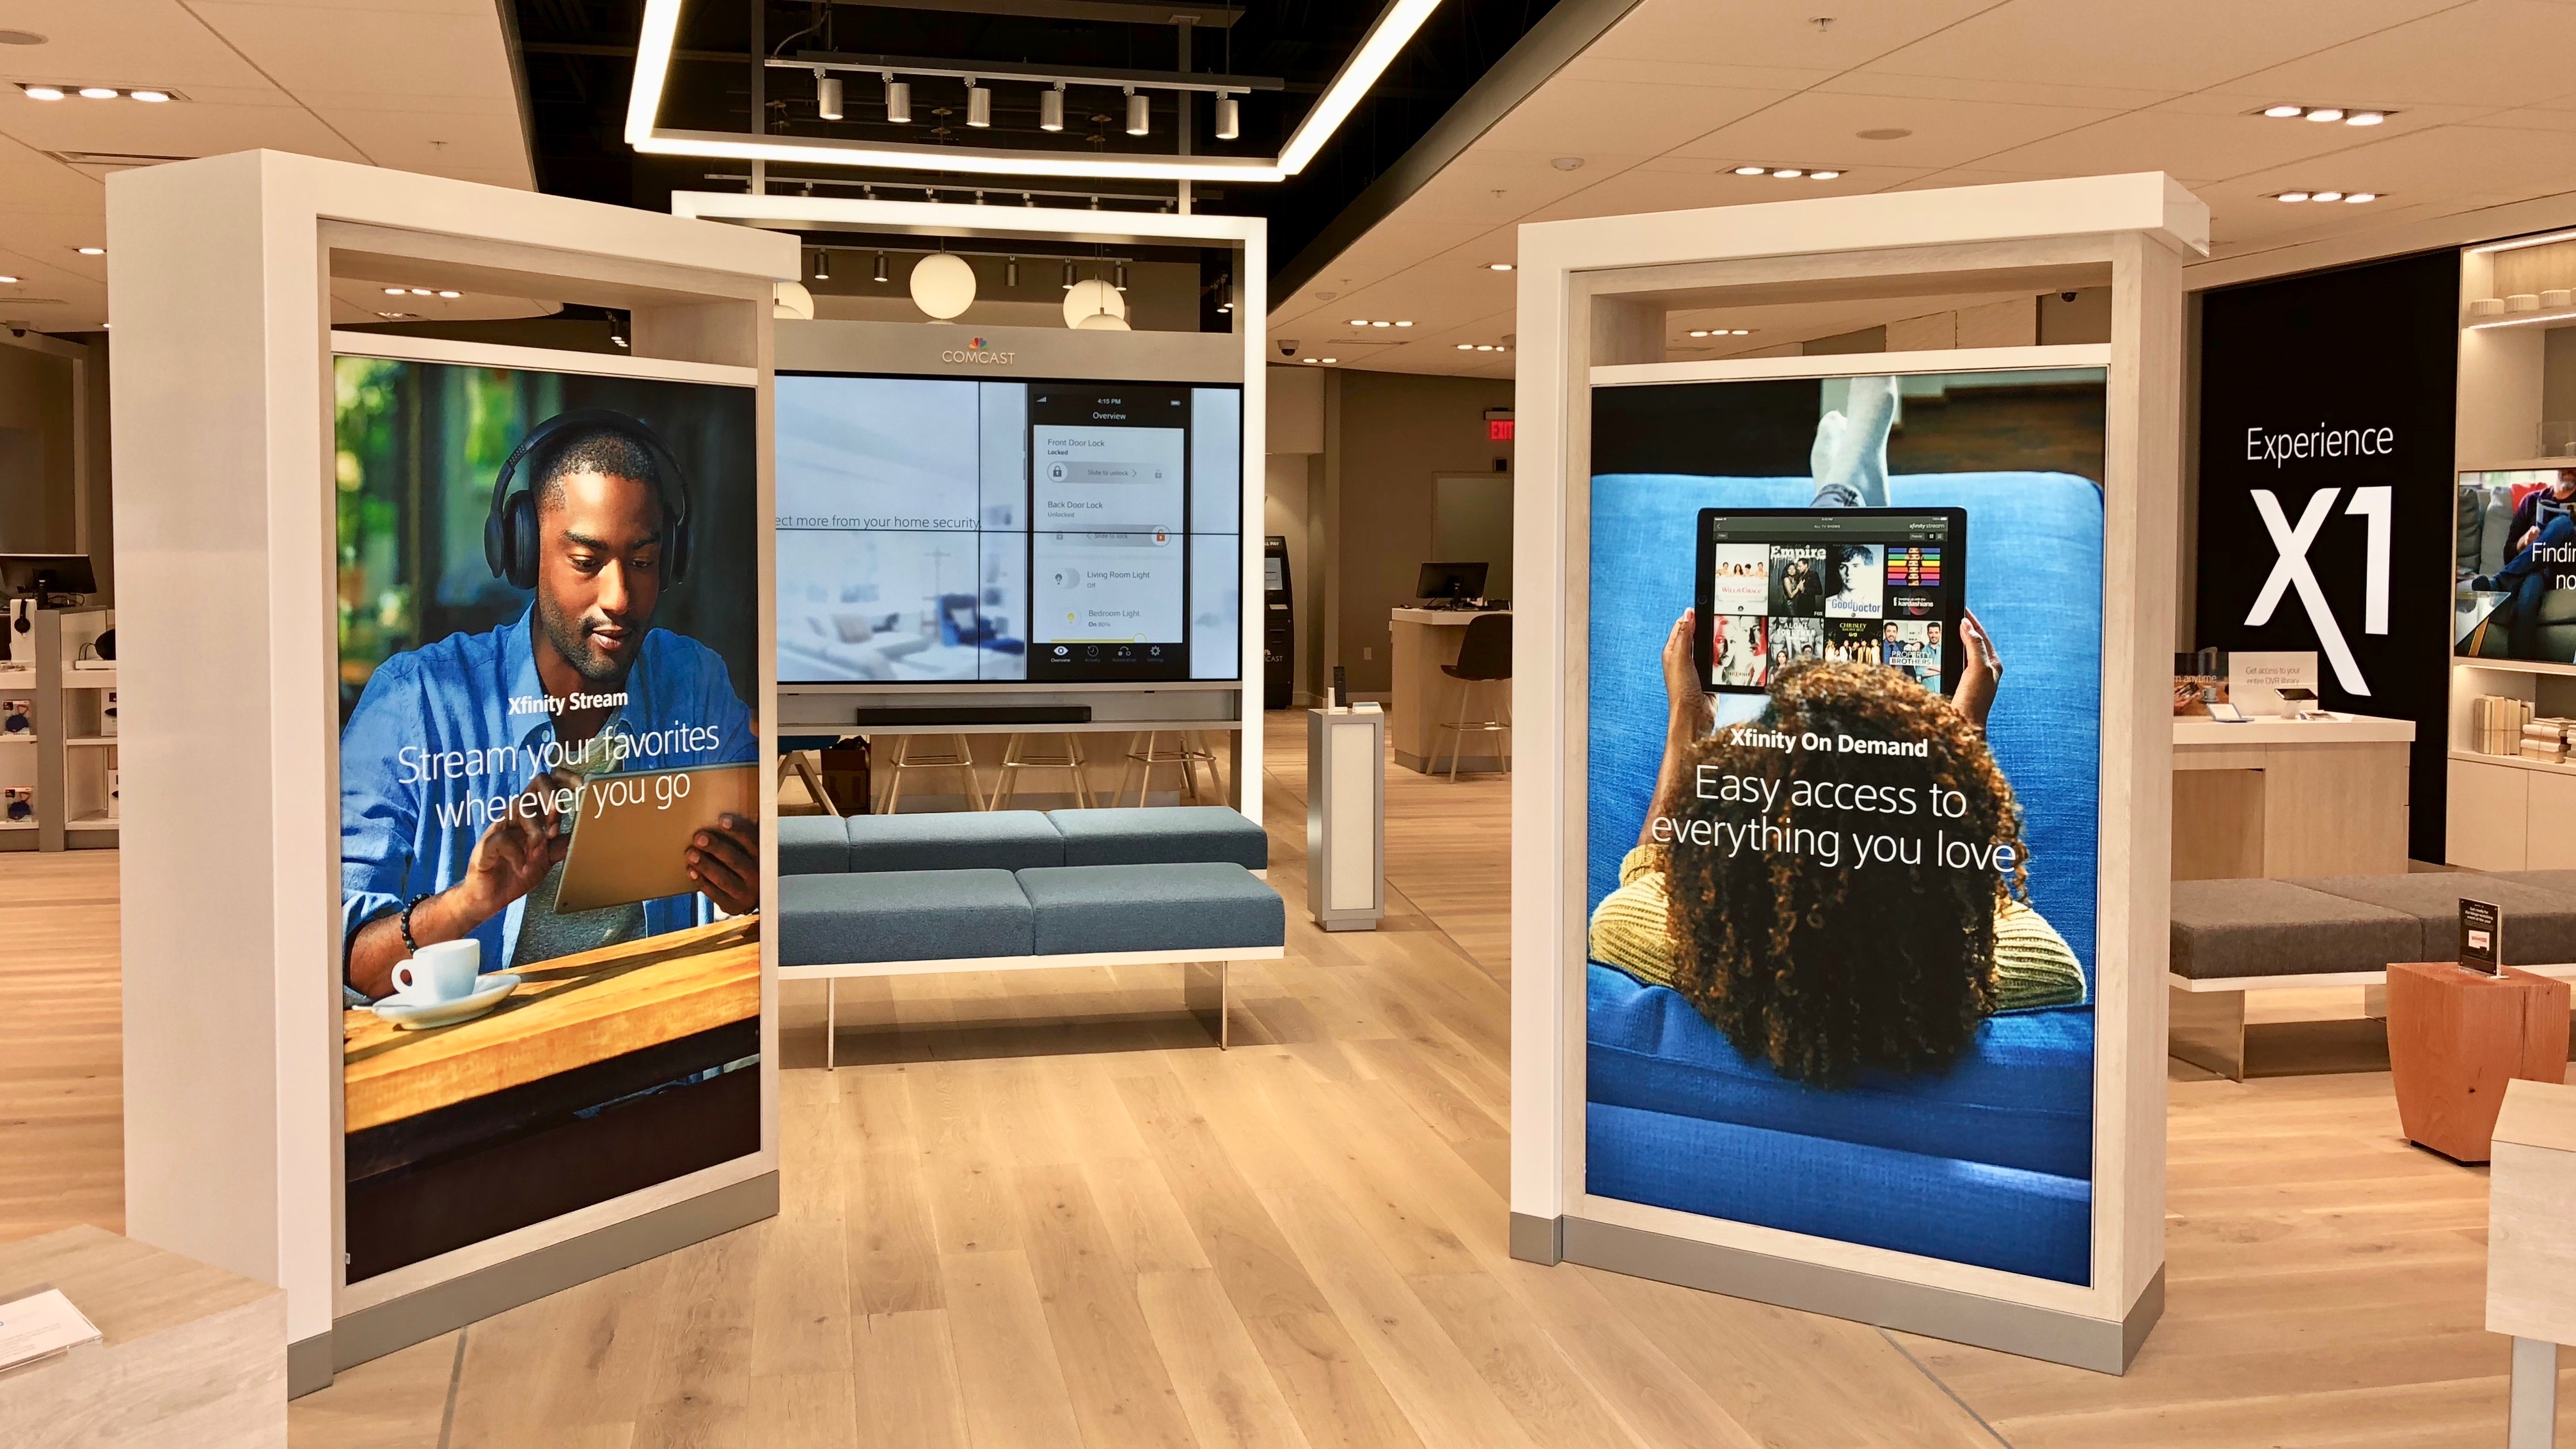 Interior of an xfinity store